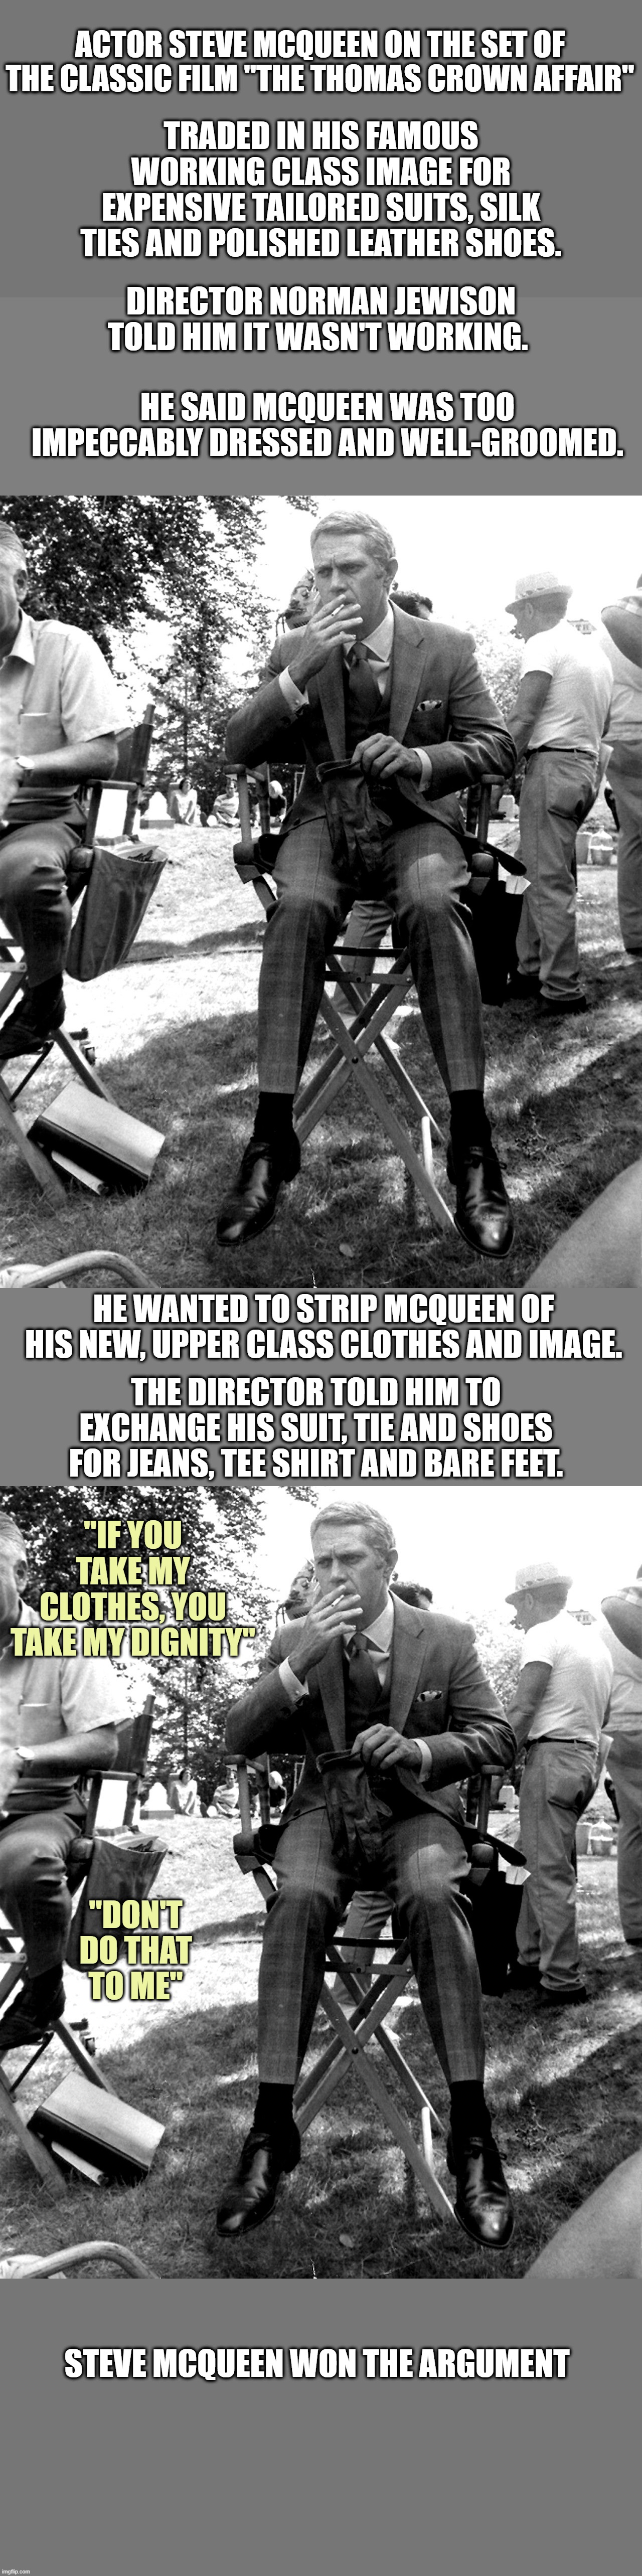 star power | ACTOR STEVE MCQUEEN ON THE SET OF THE CLASSIC FILM "THE THOMAS CROWN AFFAIR"; TRADED IN HIS FAMOUS WORKING CLASS IMAGE FOR EXPENSIVE TAILORED SUITS, SILK TIES AND POLISHED LEATHER SHOES. DIRECTOR NORMAN JEWISON TOLD HIM IT WASN'T WORKING. HE SAID MCQUEEN WAS TOO IMPECCABLY DRESSED AND WELL-GROOMED. HE WANTED TO STRIP MCQUEEN OF HIS NEW, UPPER CLASS CLOTHES AND IMAGE. THE DIRECTOR TOLD HIM TO EXCHANGE HIS SUIT, TIE AND SHOES FOR JEANS, TEE SHIRT AND BARE FEET. "IF YOU TAKE MY CLOTHES, YOU TAKE MY DIGNITY"; "DON'T DO THAT TO ME"; STEVE MCQUEEN WON THE ARGUMENT | image tagged in films | made w/ Imgflip meme maker